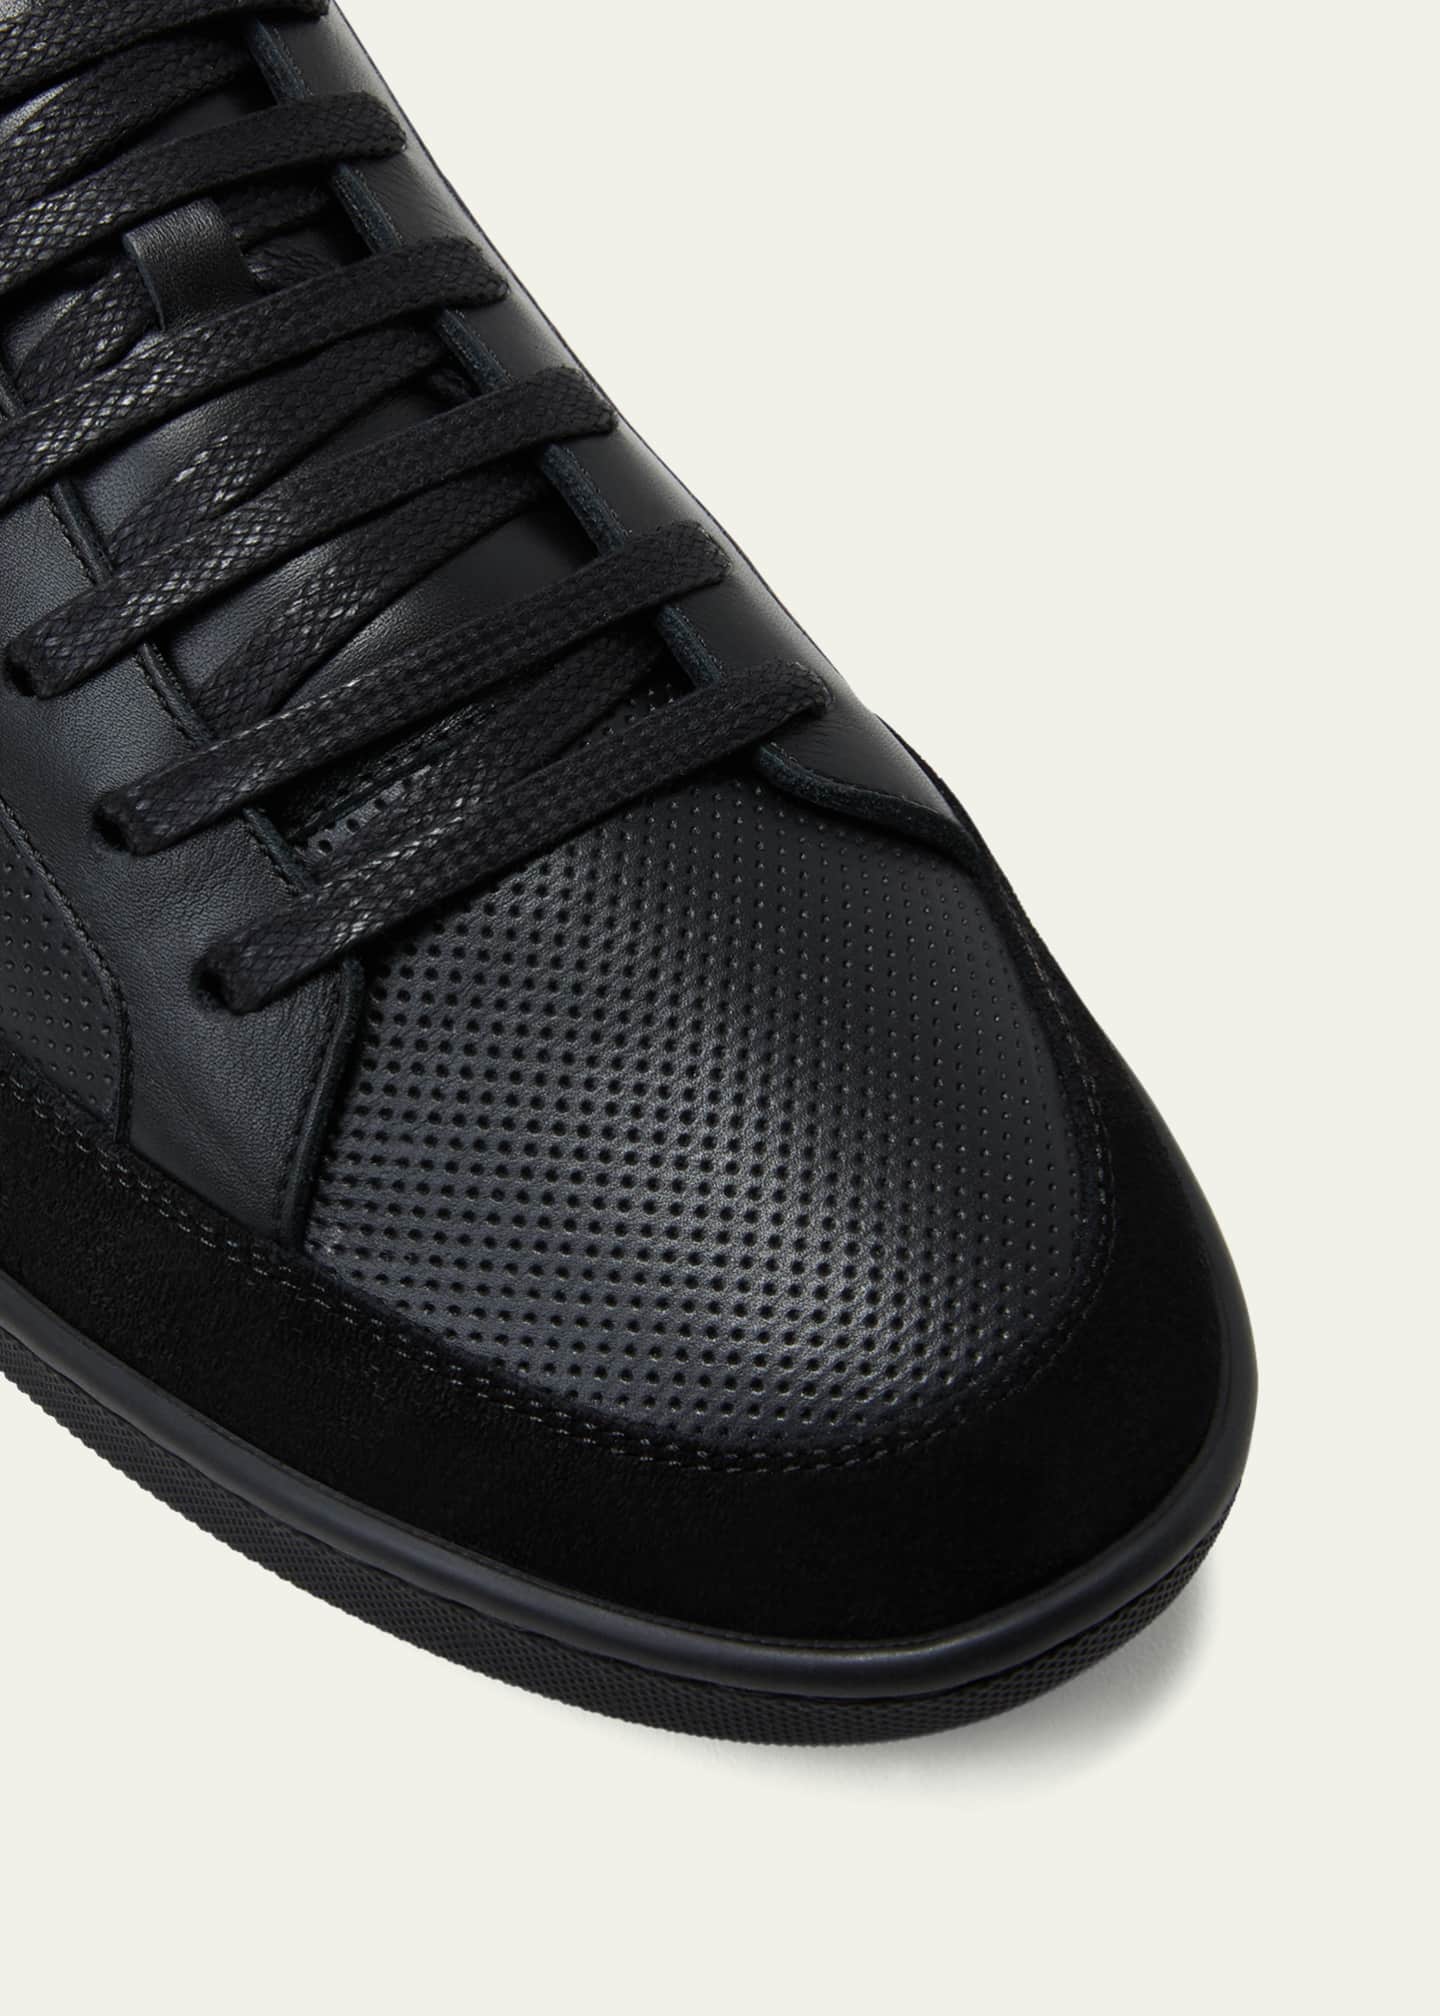 Saint Laurent Men's SL/10 Court Classic Perforated Leather Sneakers Image 5 of 5